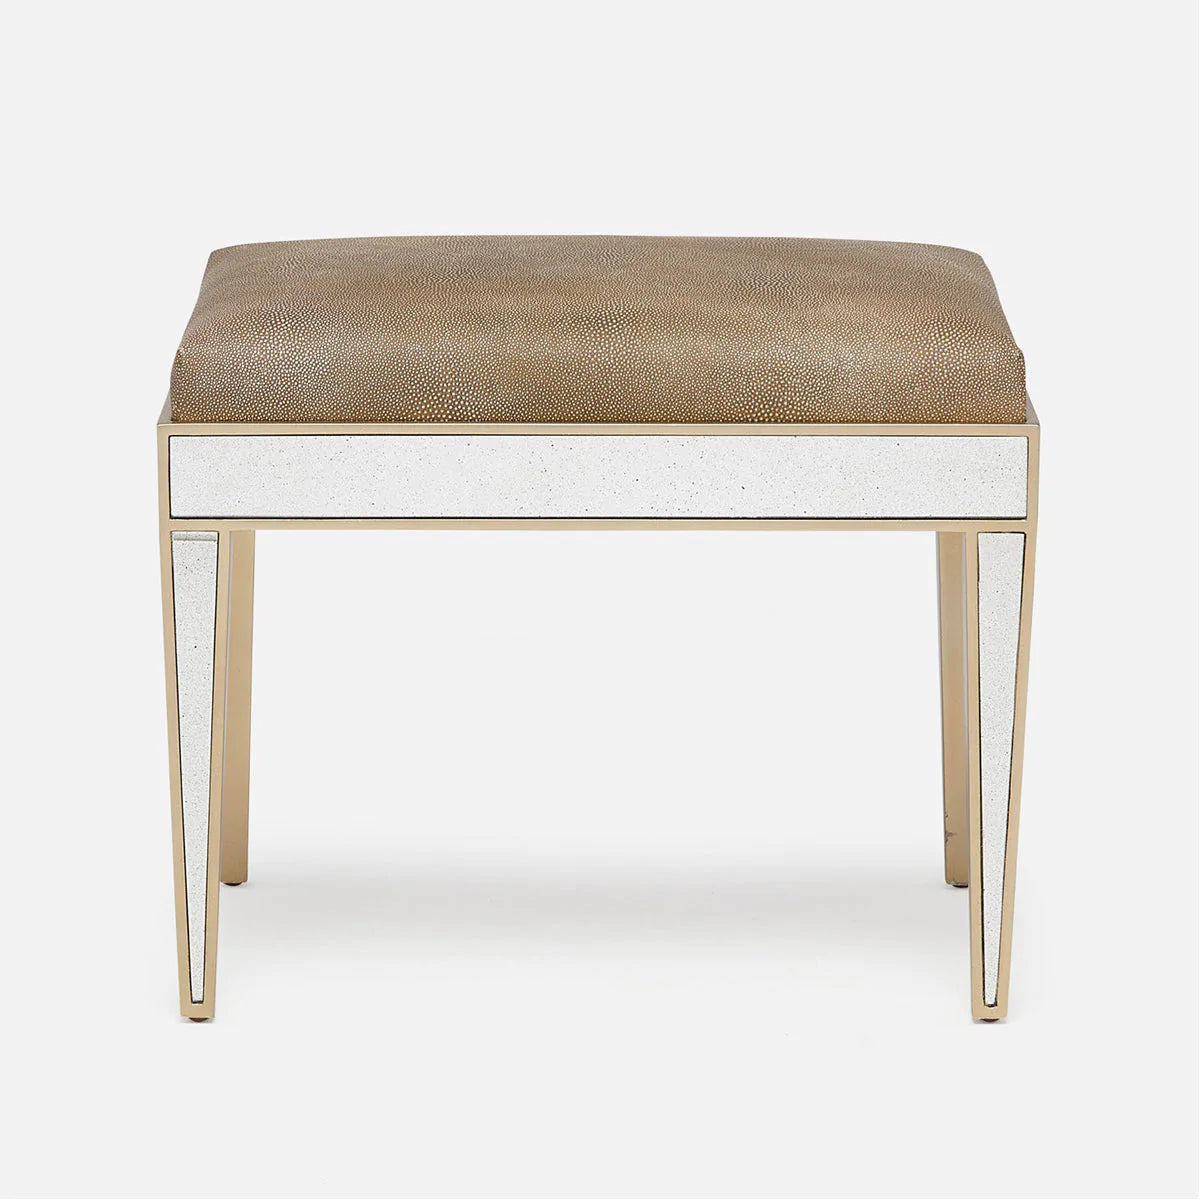 Made Goods Mia Upholstered Mirrored Single Bench in Pagua Fabric